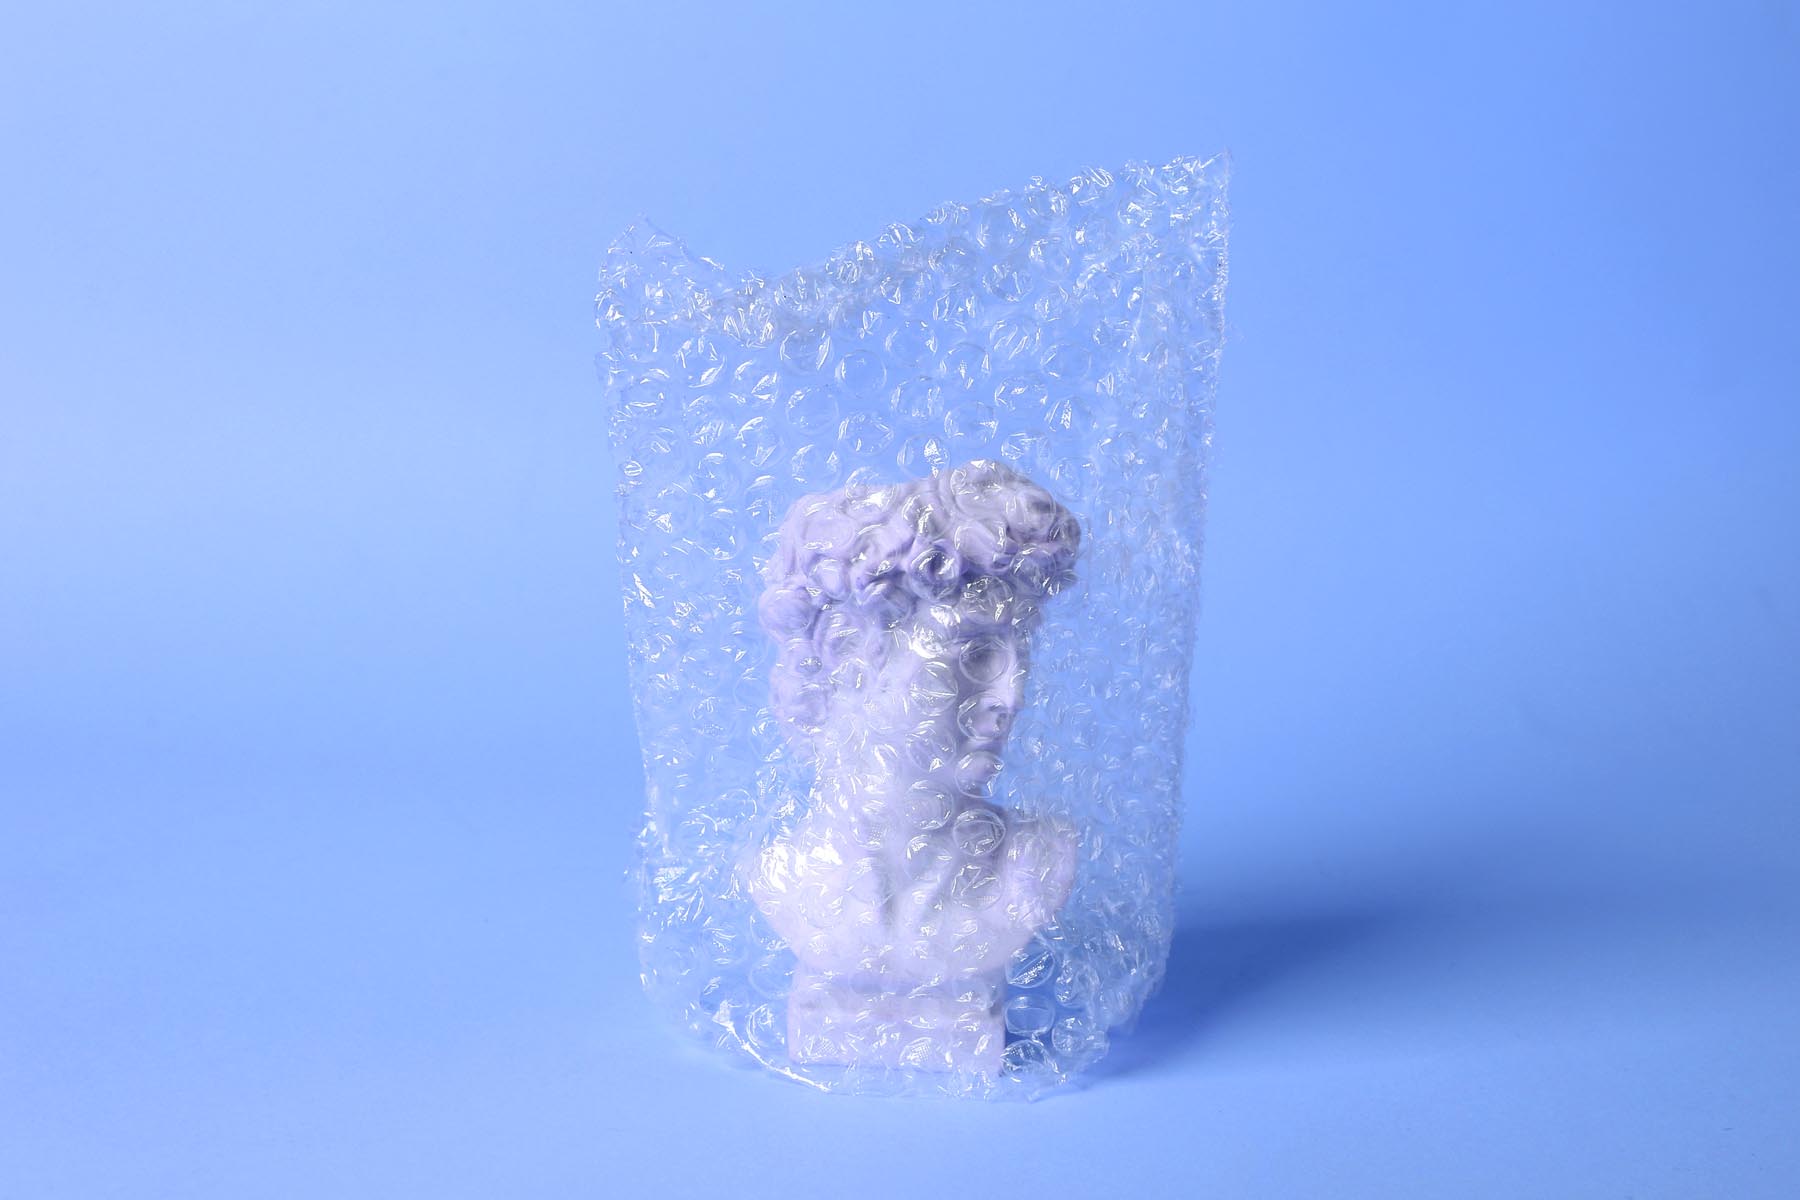 David Bust in bubble wrap on a pink background. Minimal contemporary still life